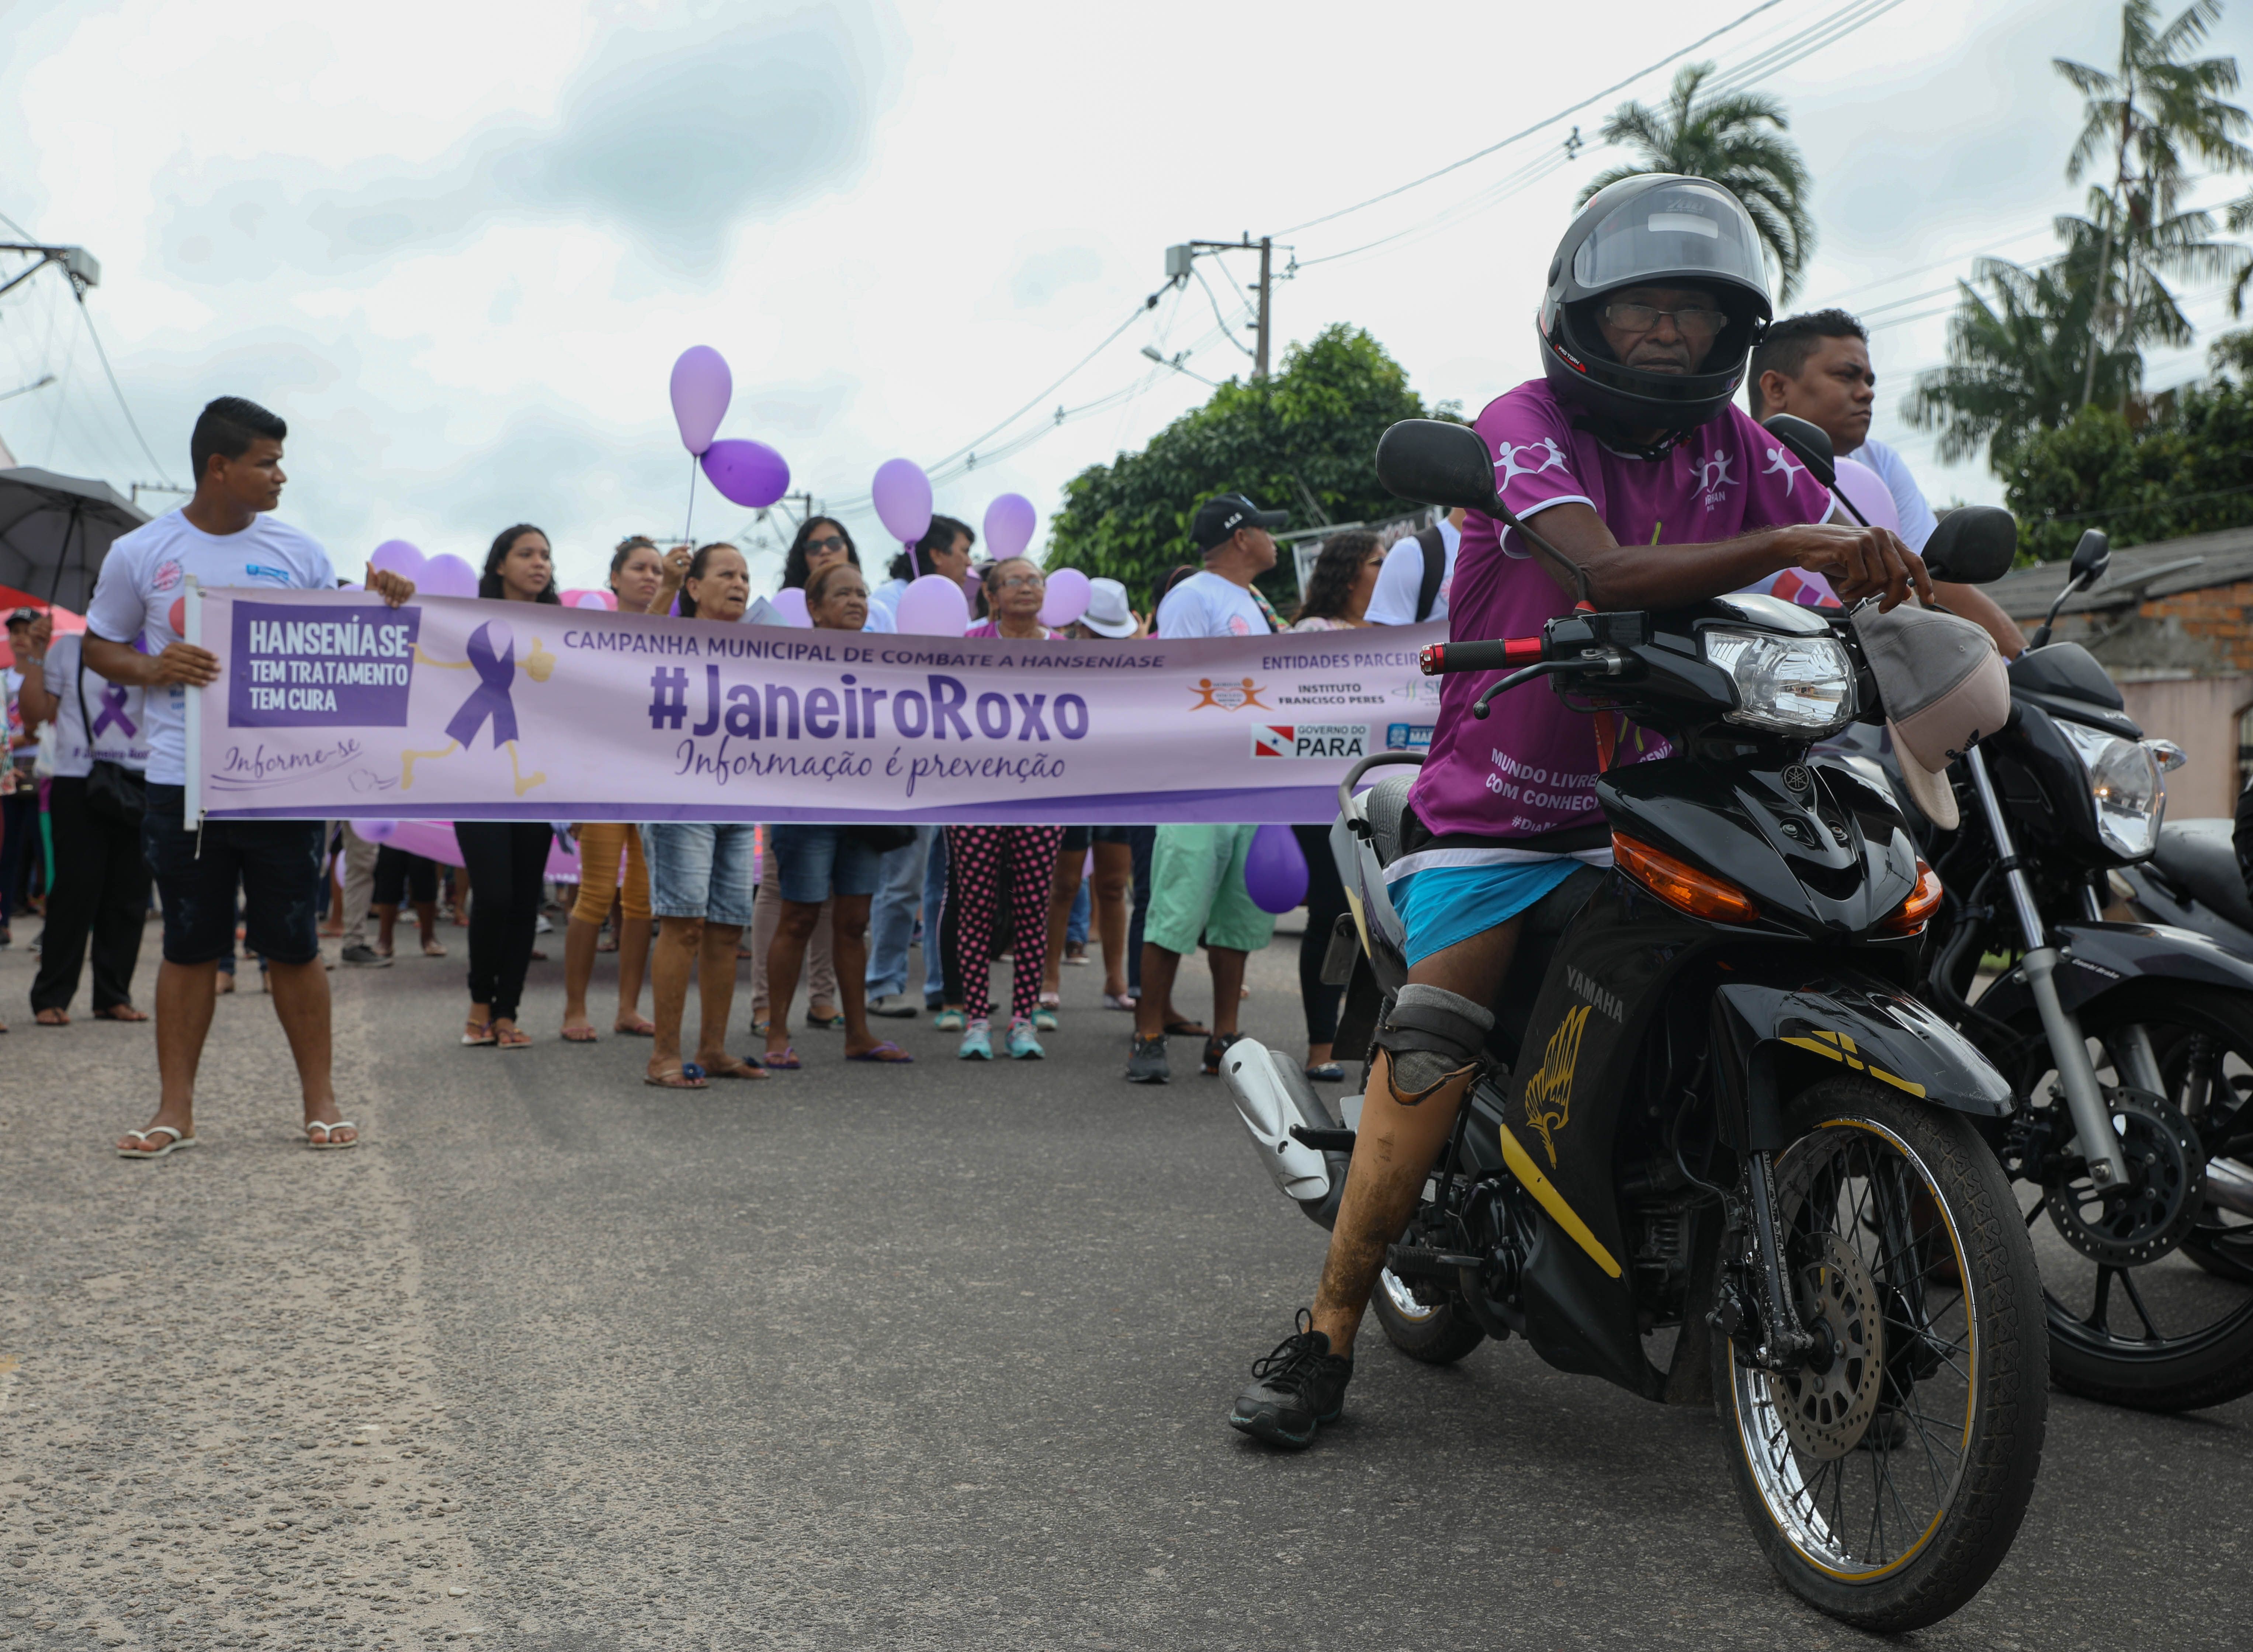 A former leprosy patient, who lost his leg to the disease, leads a leprosy awareness march on his motorcycle in Marituba. Image by Anton L. Delgado. Brazil, 2020.